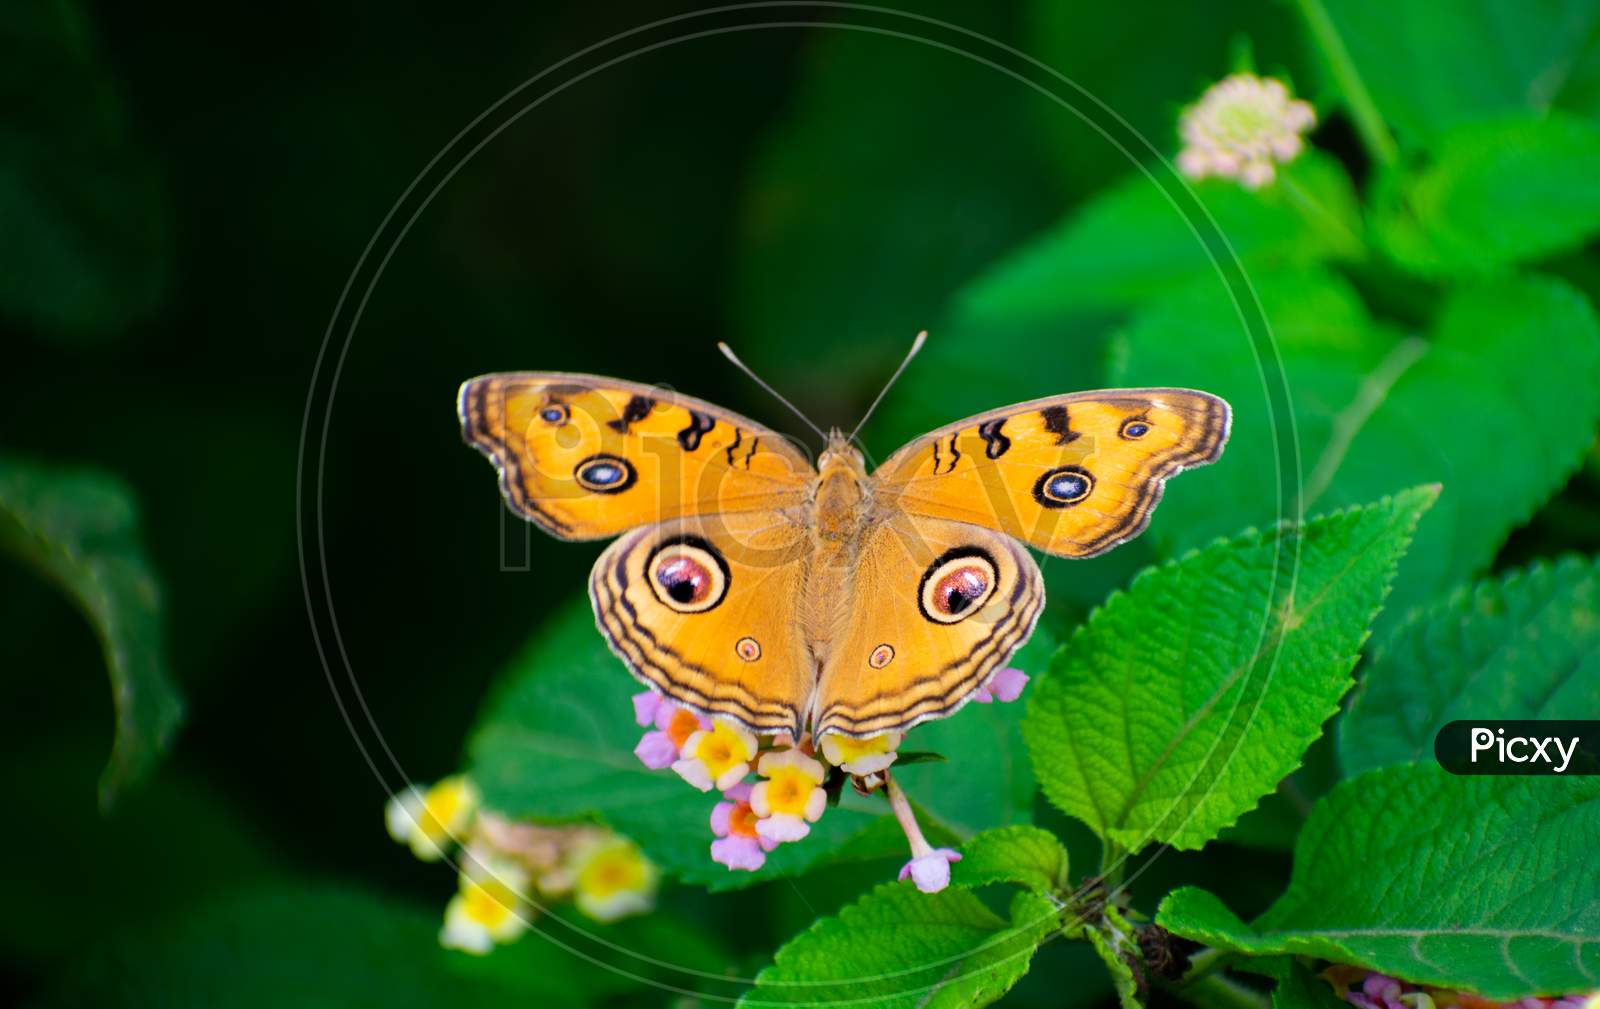 PEACOCK PANSY BUTTERFLY SITTING ON A FLOWER AND SUCKING HONEY